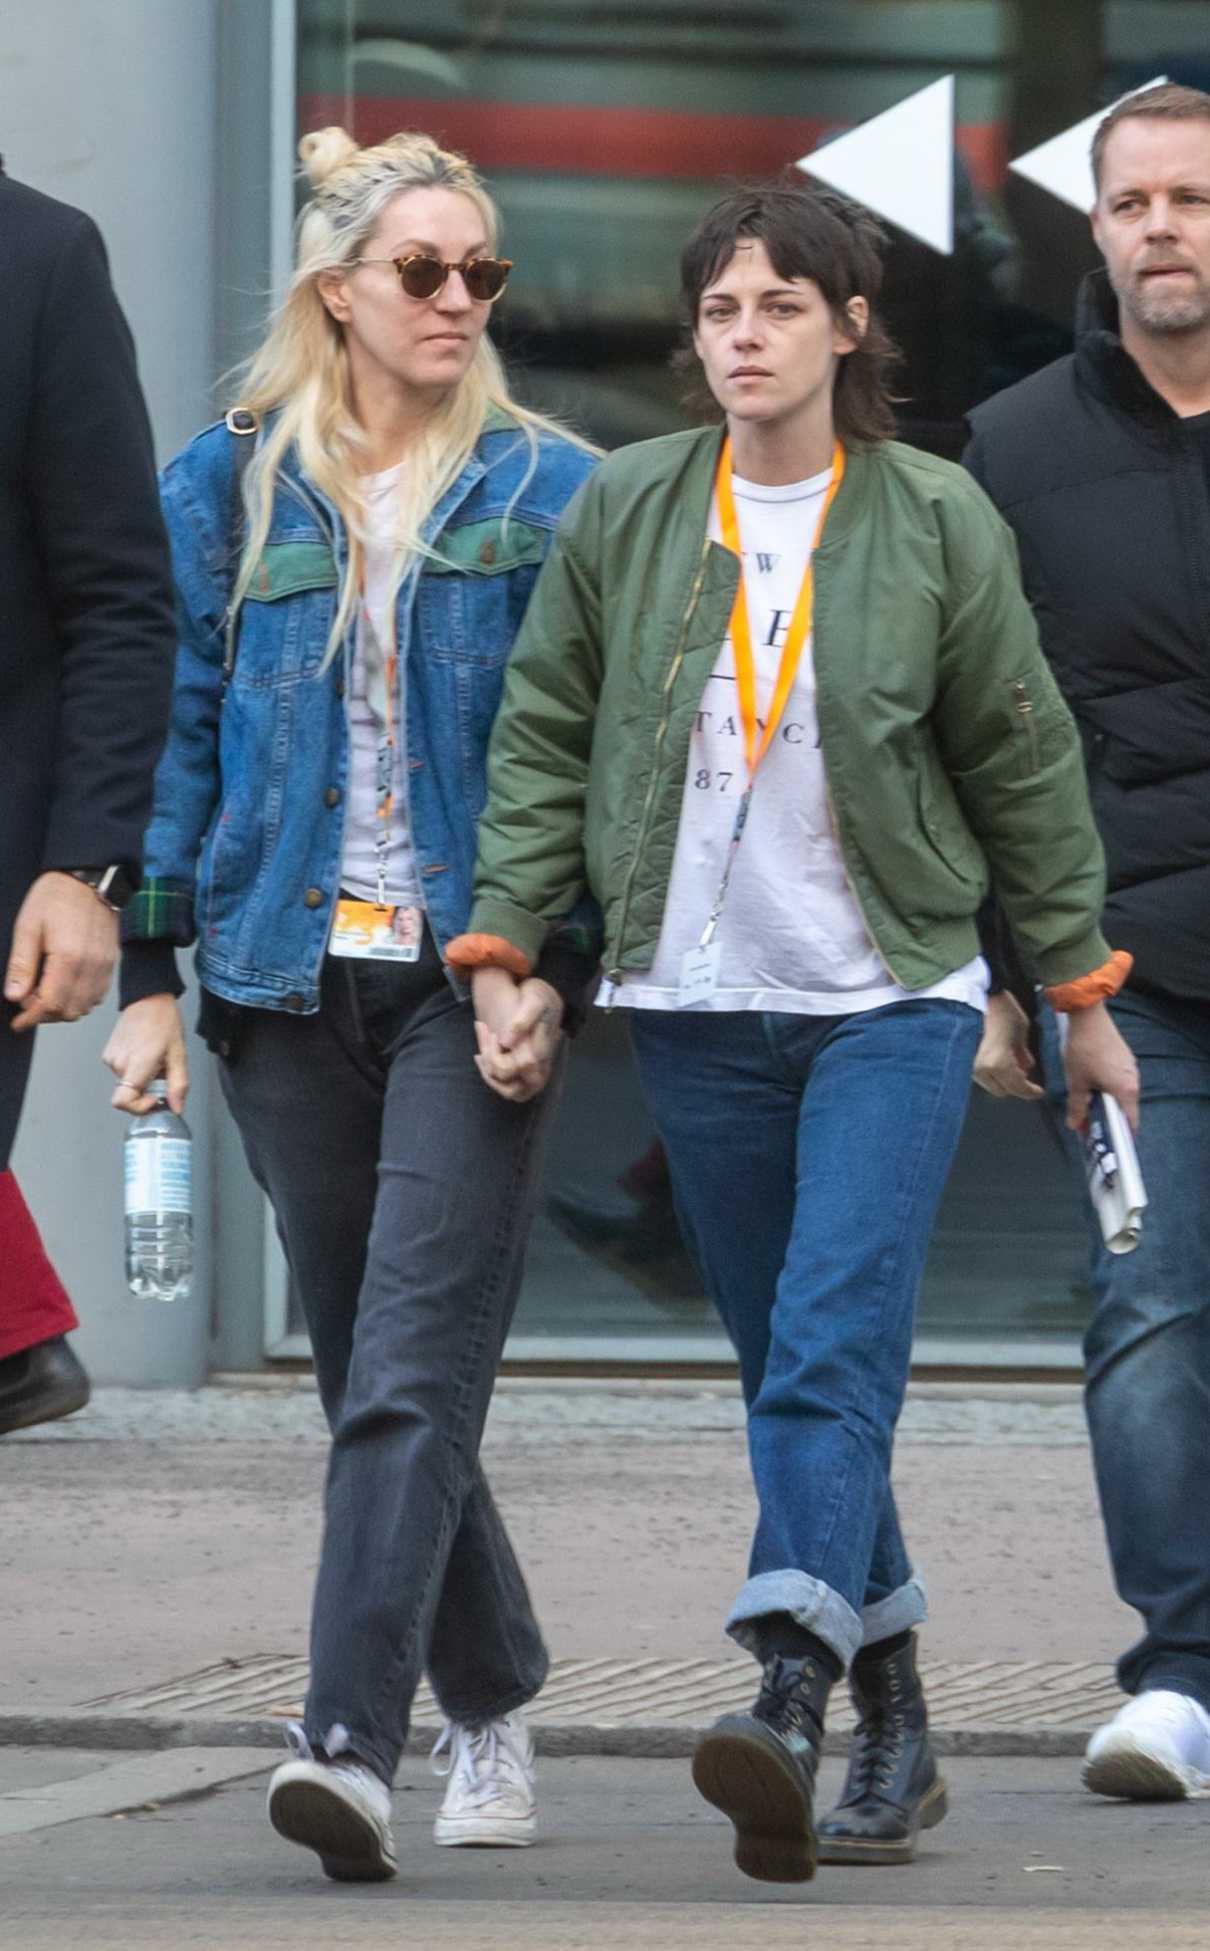 Kristen Stewart in an Olive Bomber Jacket Was Seen Out with Dylan Meyer ...